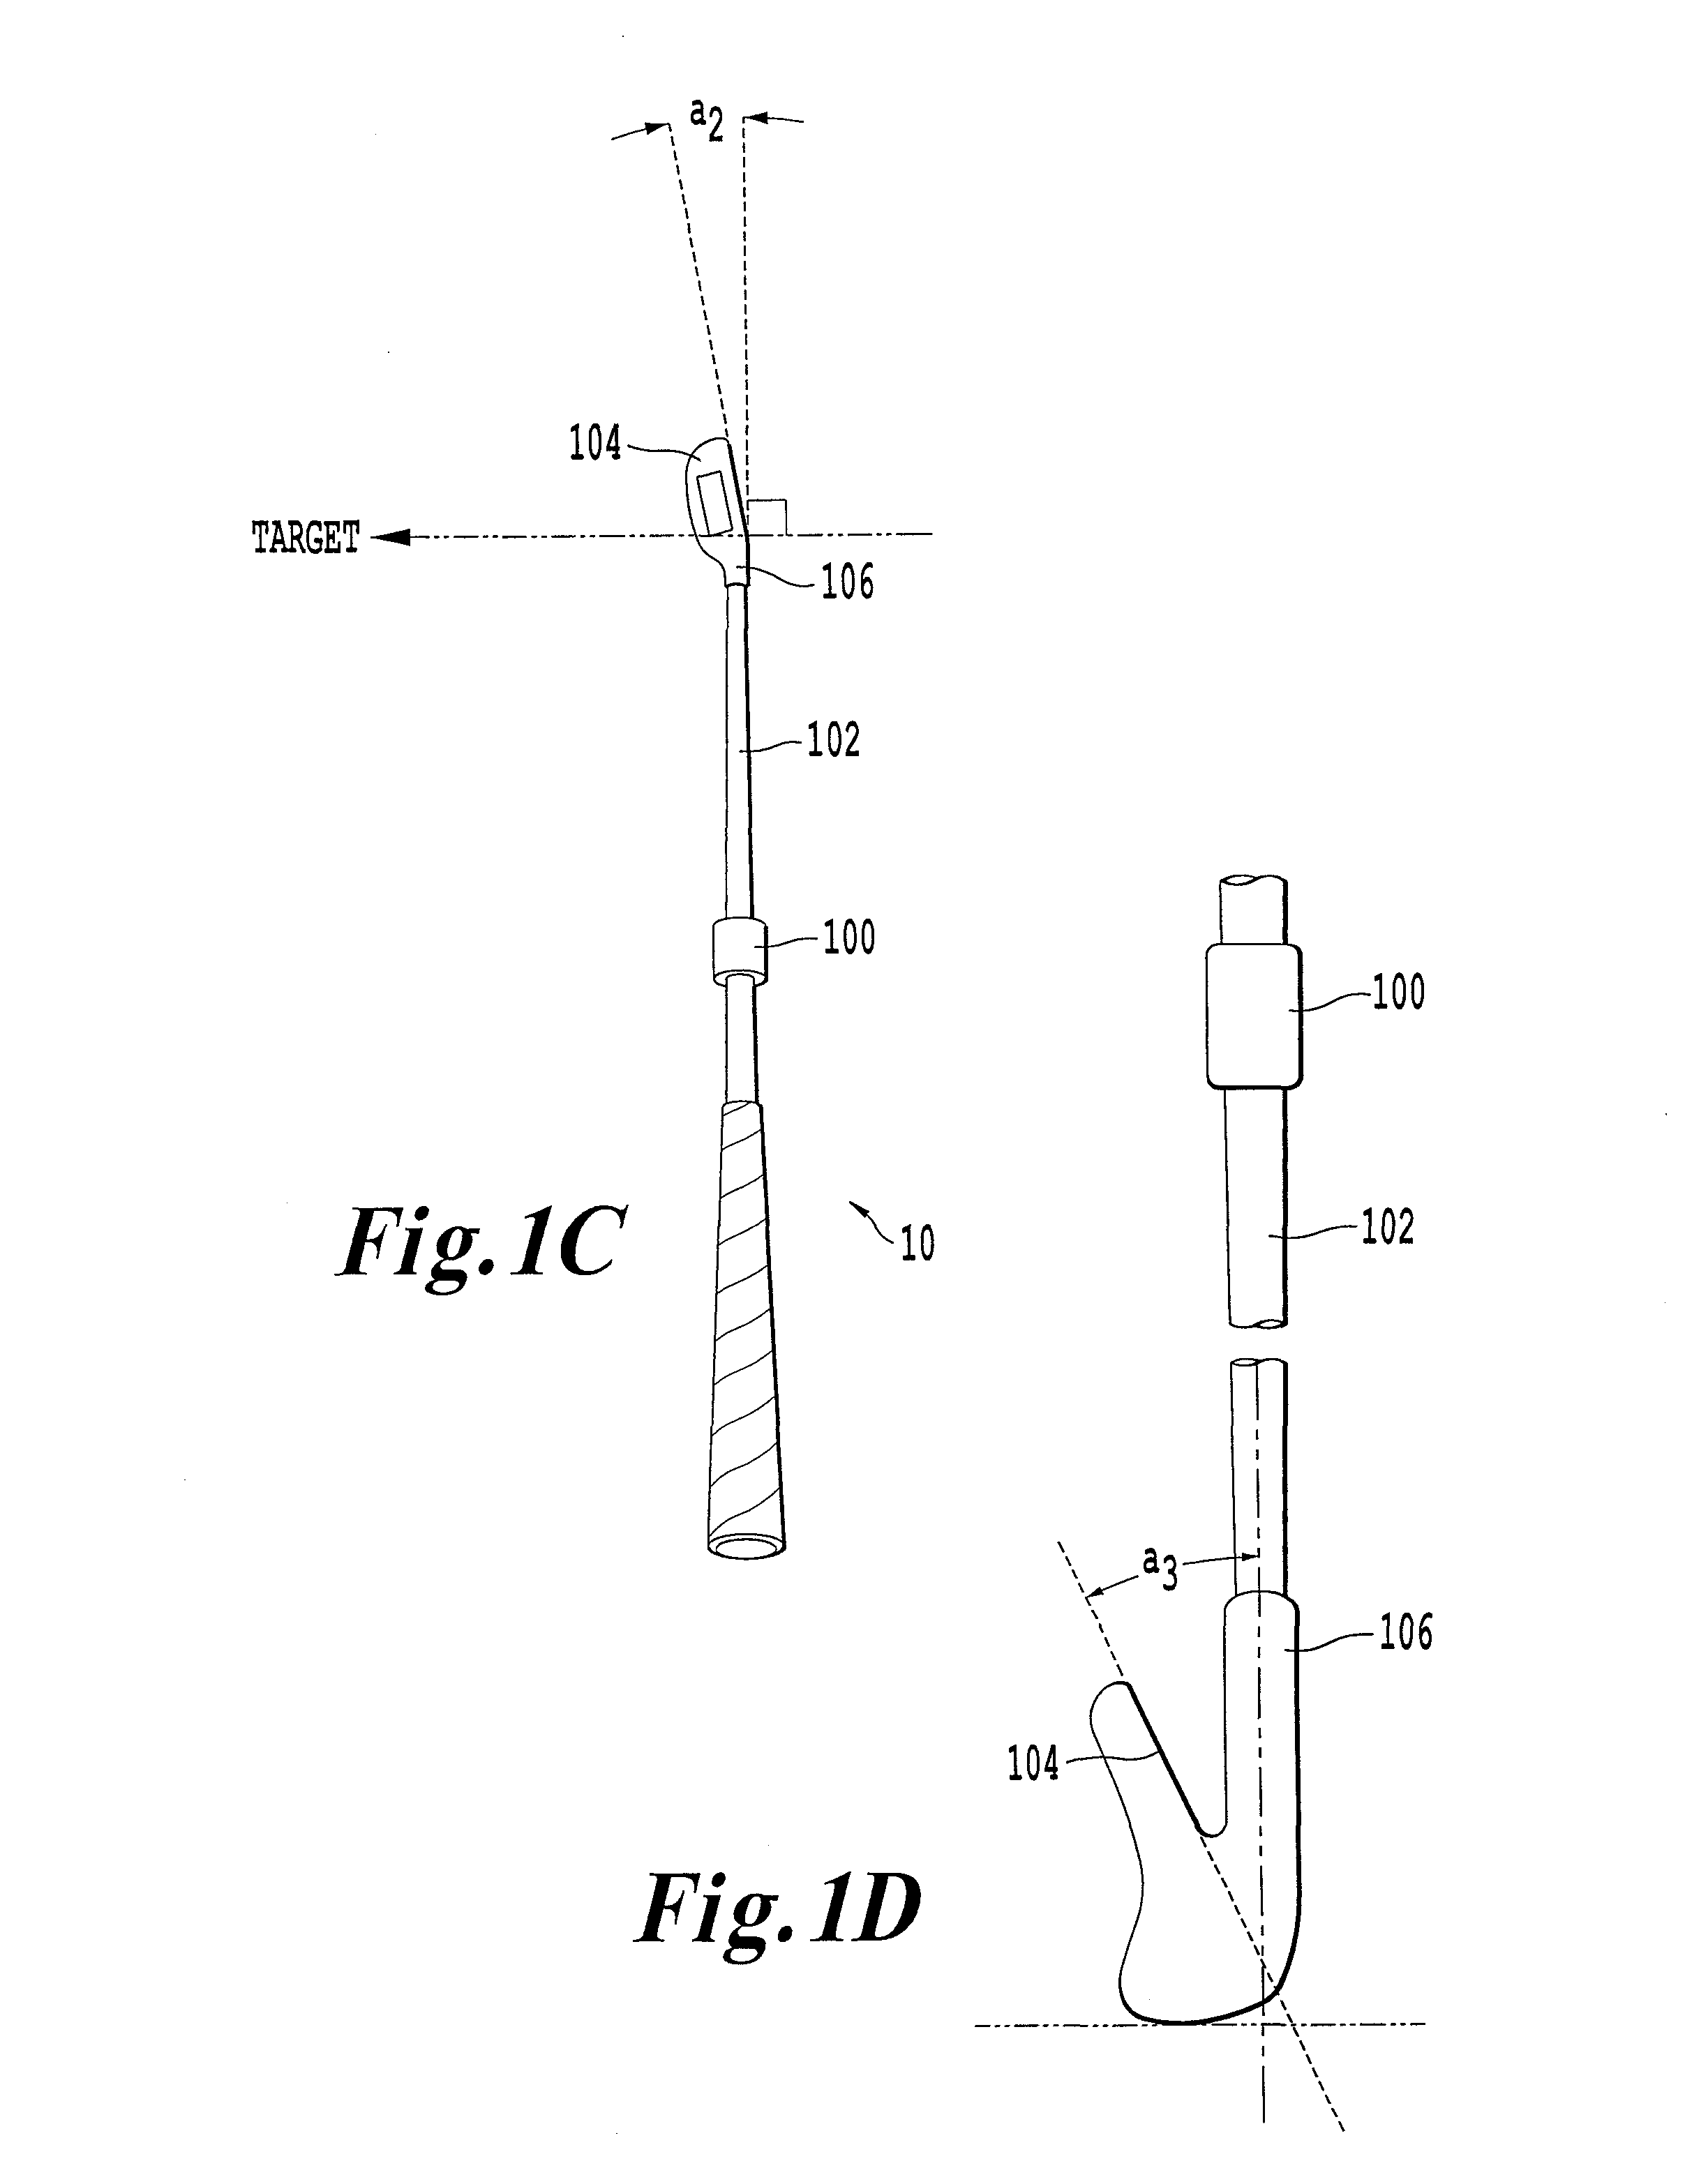 Method and apparatus for determining a relative orientation of points on a rigid body